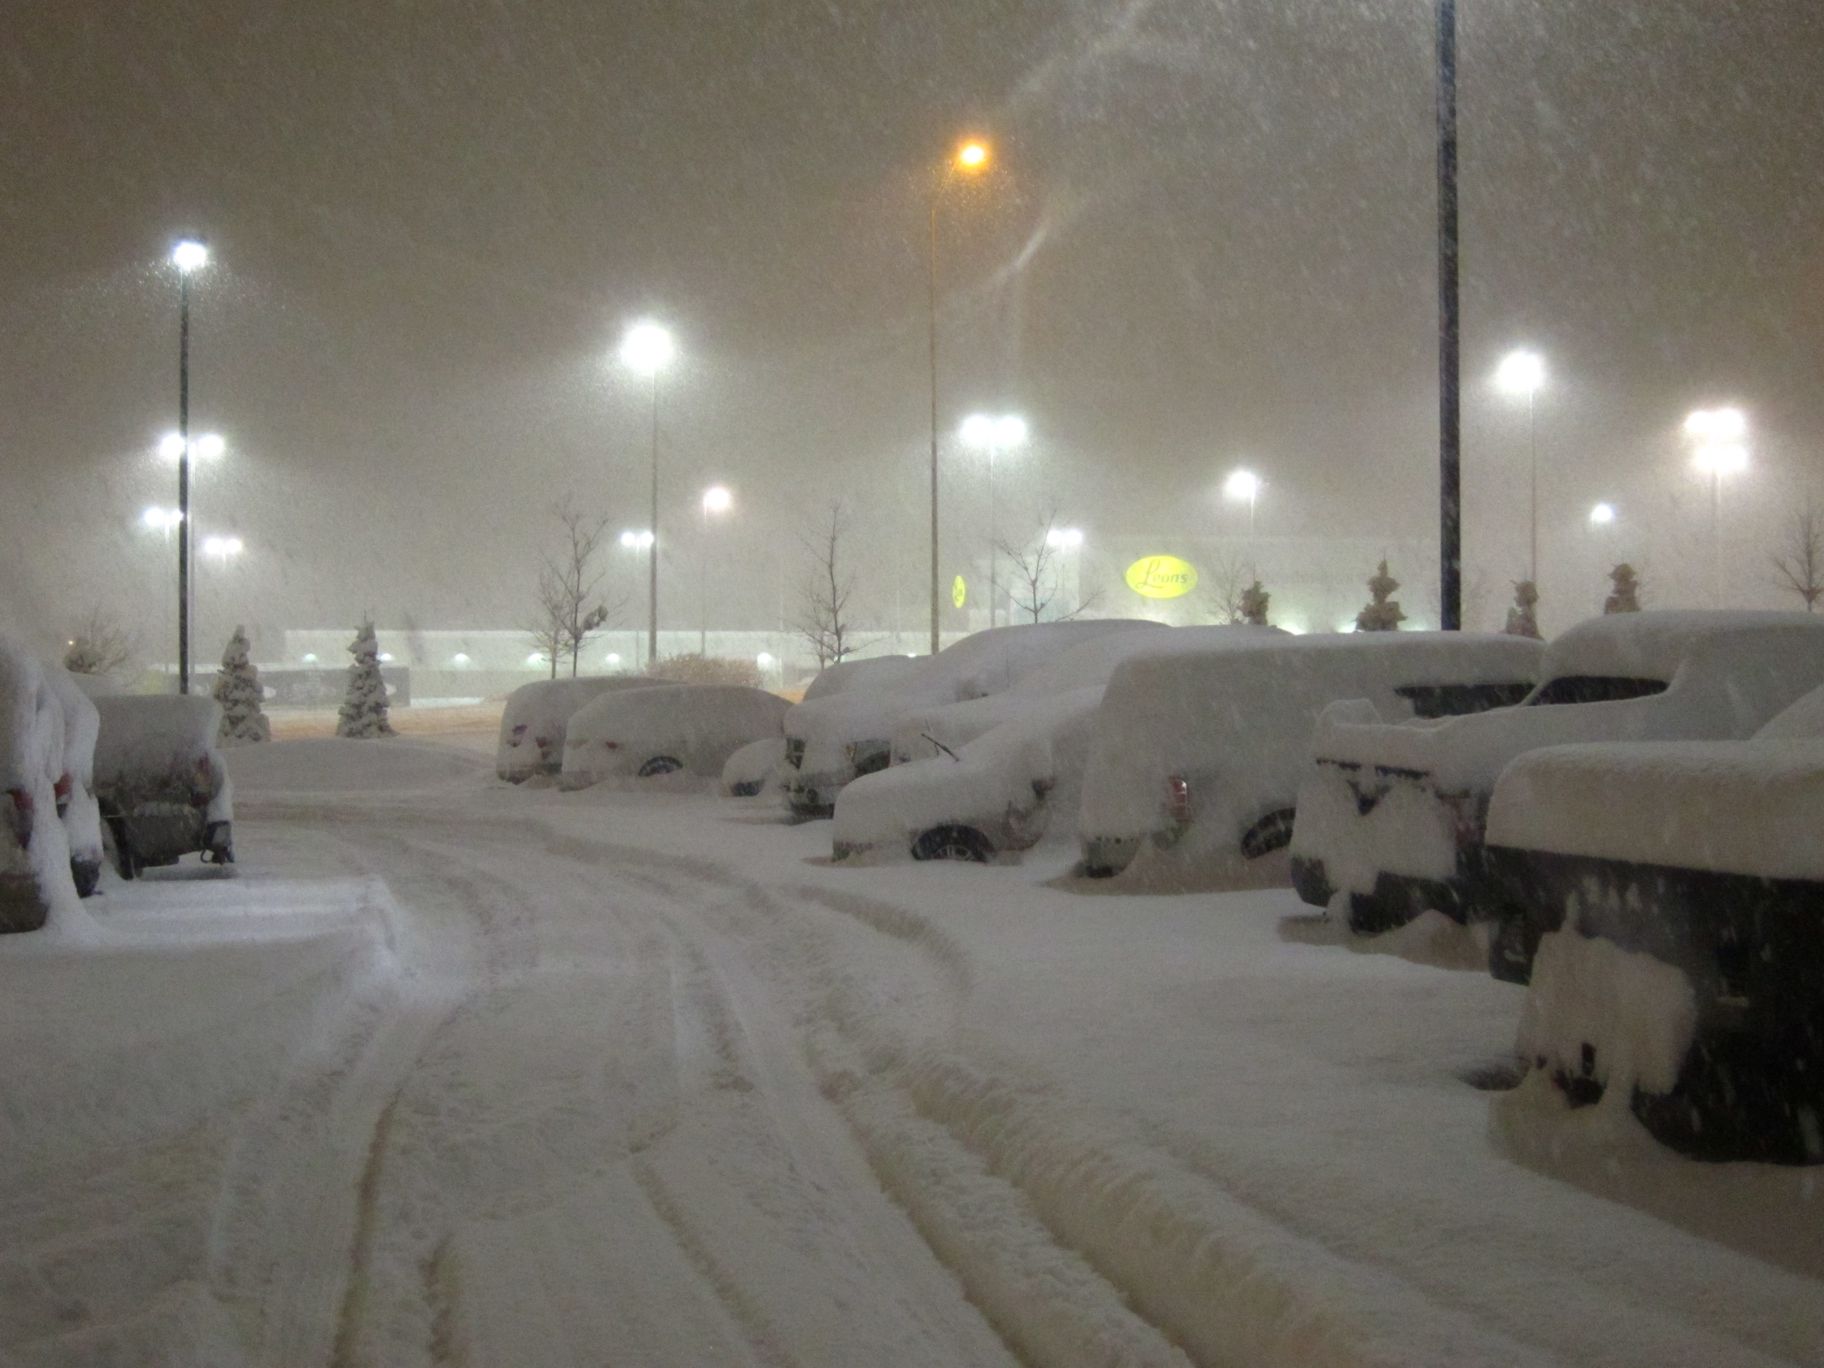 Snow Covered Cars at GCPEx, nightime parking lot